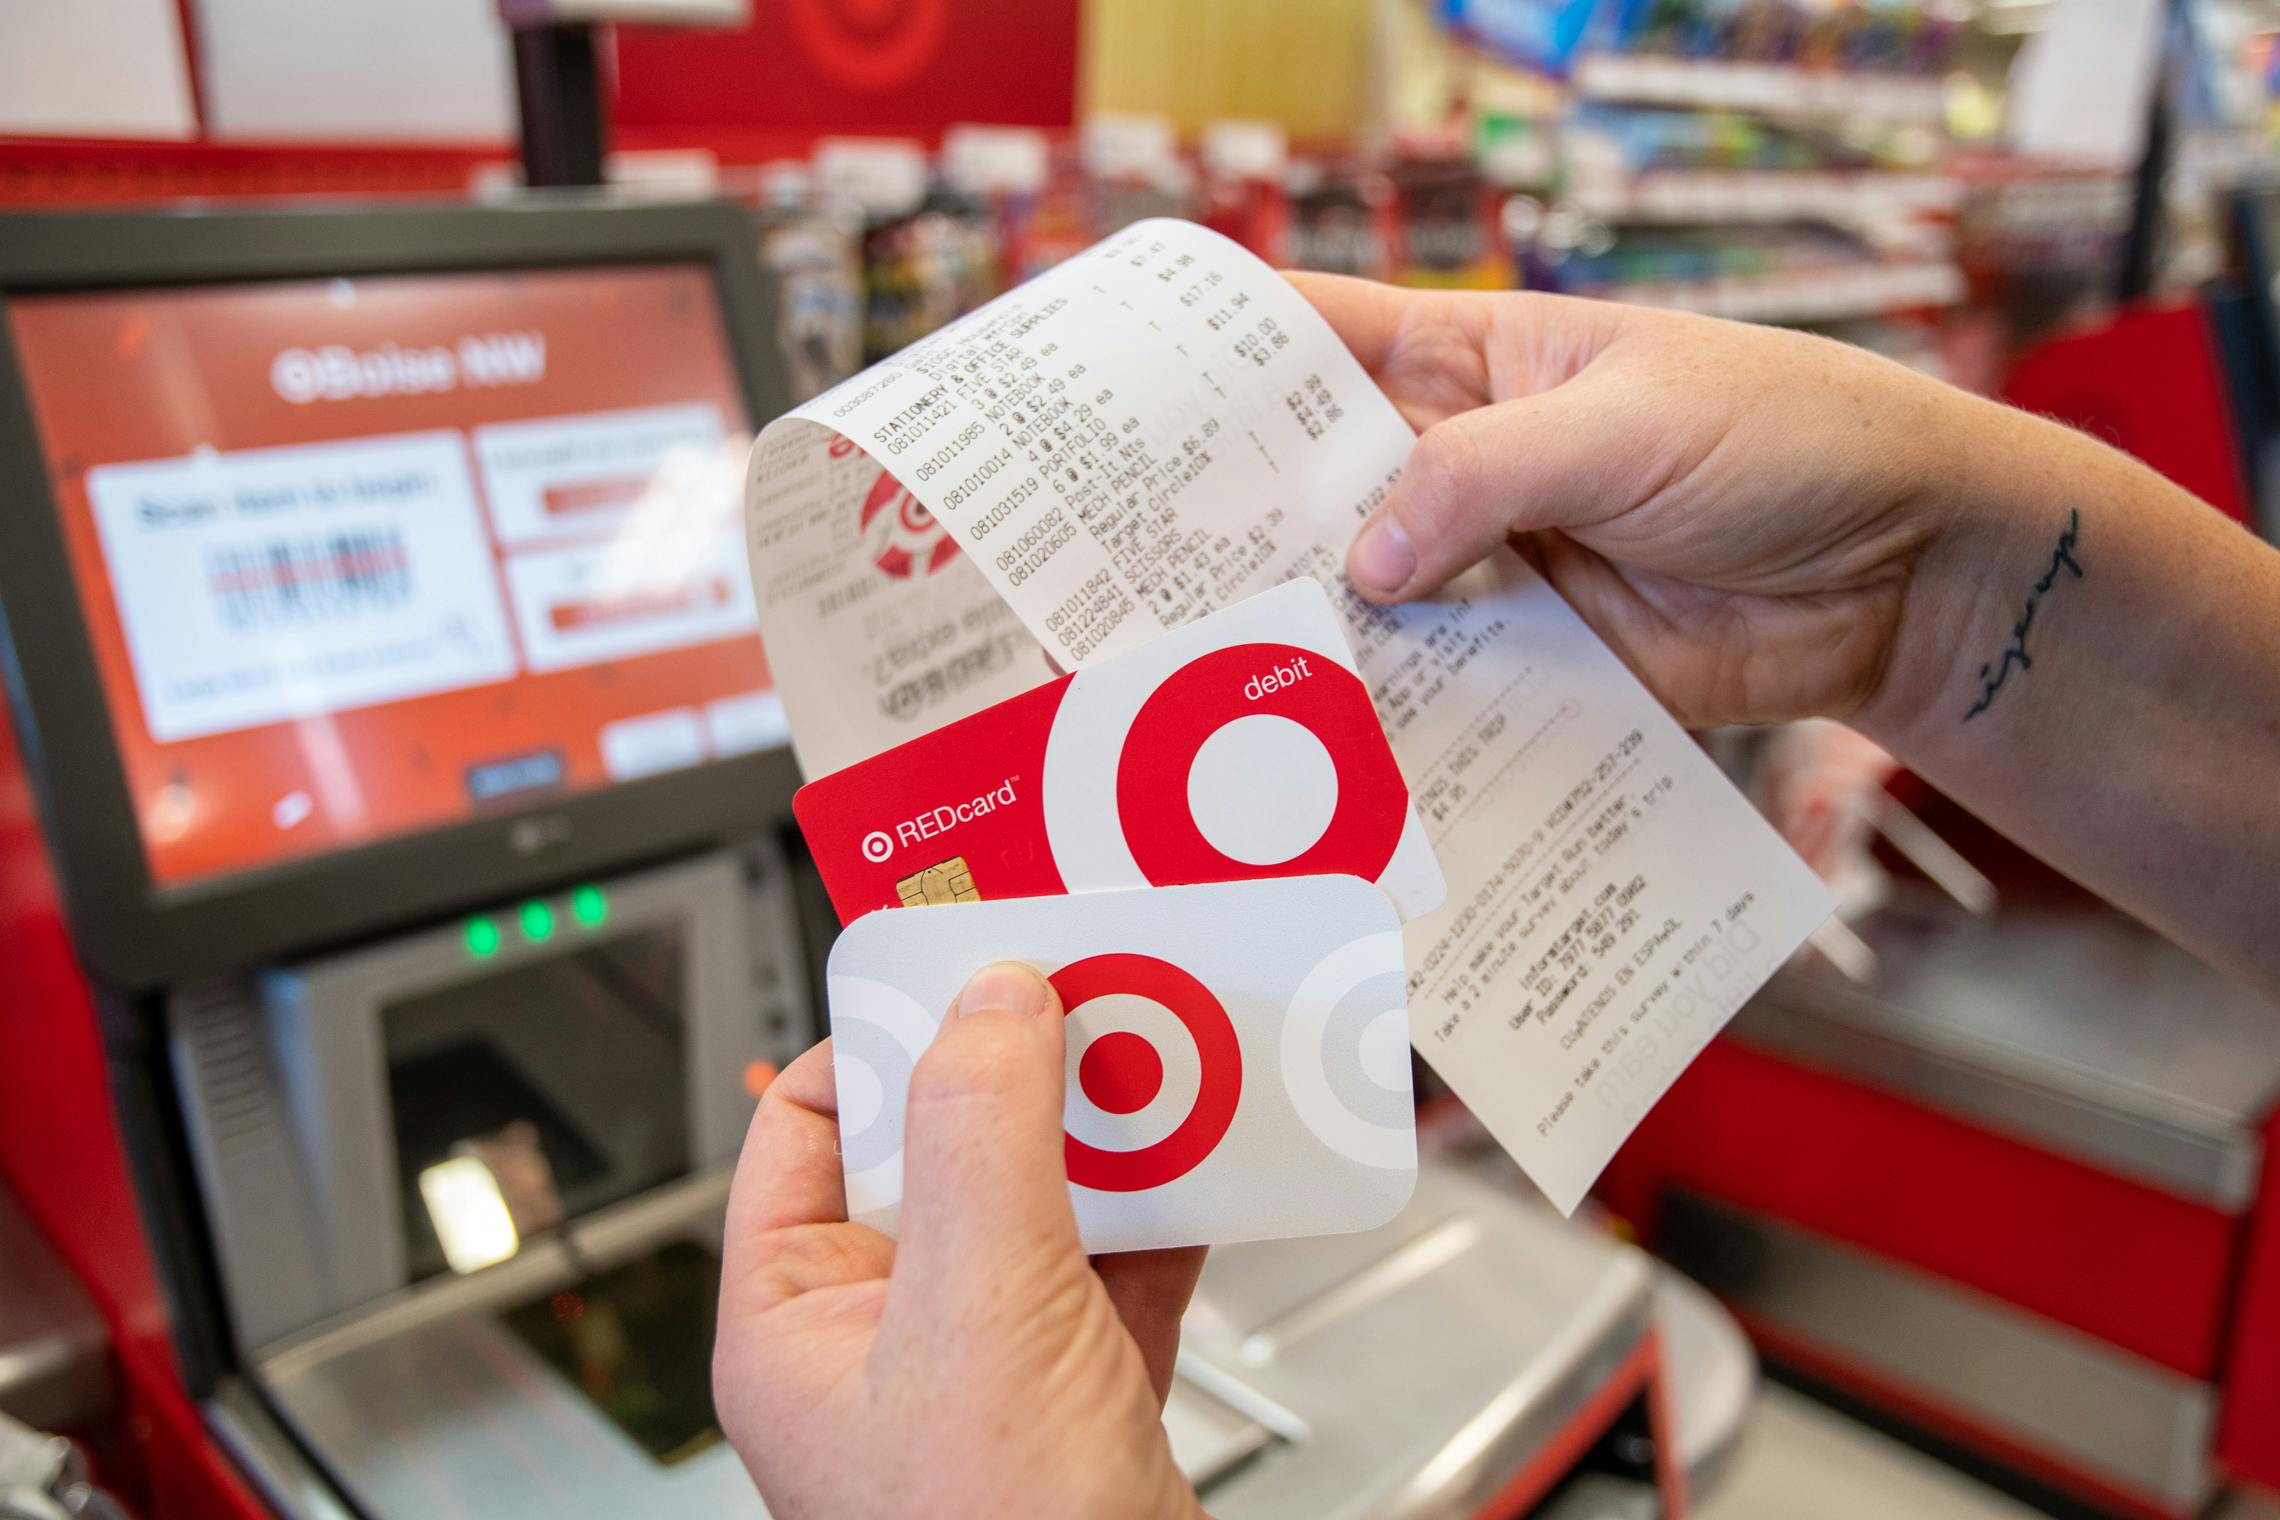 A person's hands holding up a Target gift card, a Target Red Card, and a receipt in front of the self-checkout scanner at Target.